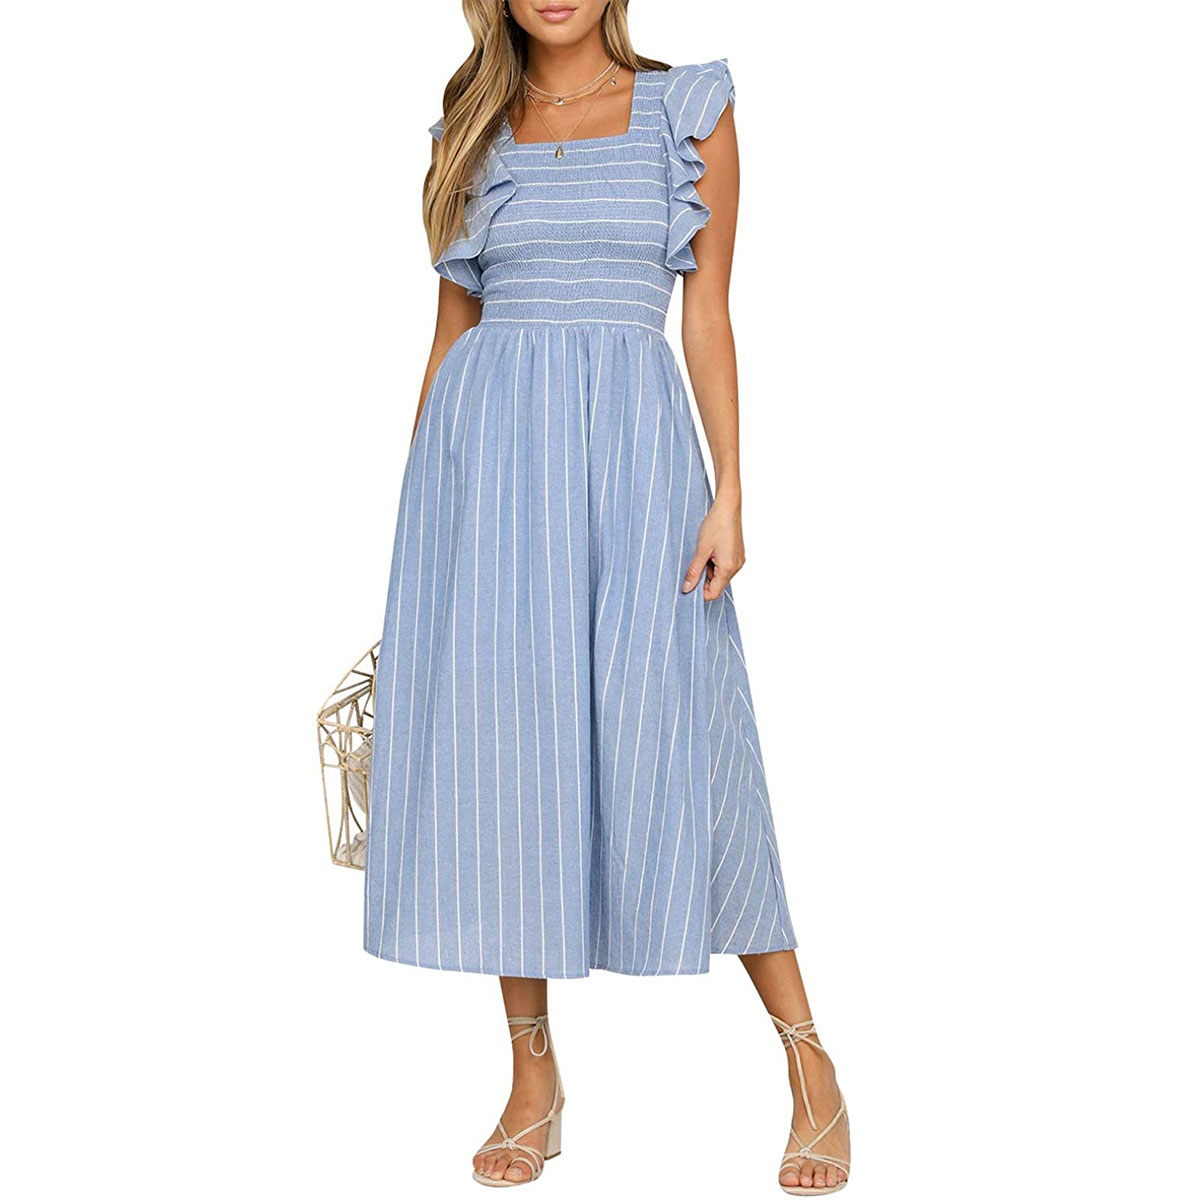 The 24 Best Dresses and Tops on Amazon | Who What Wear